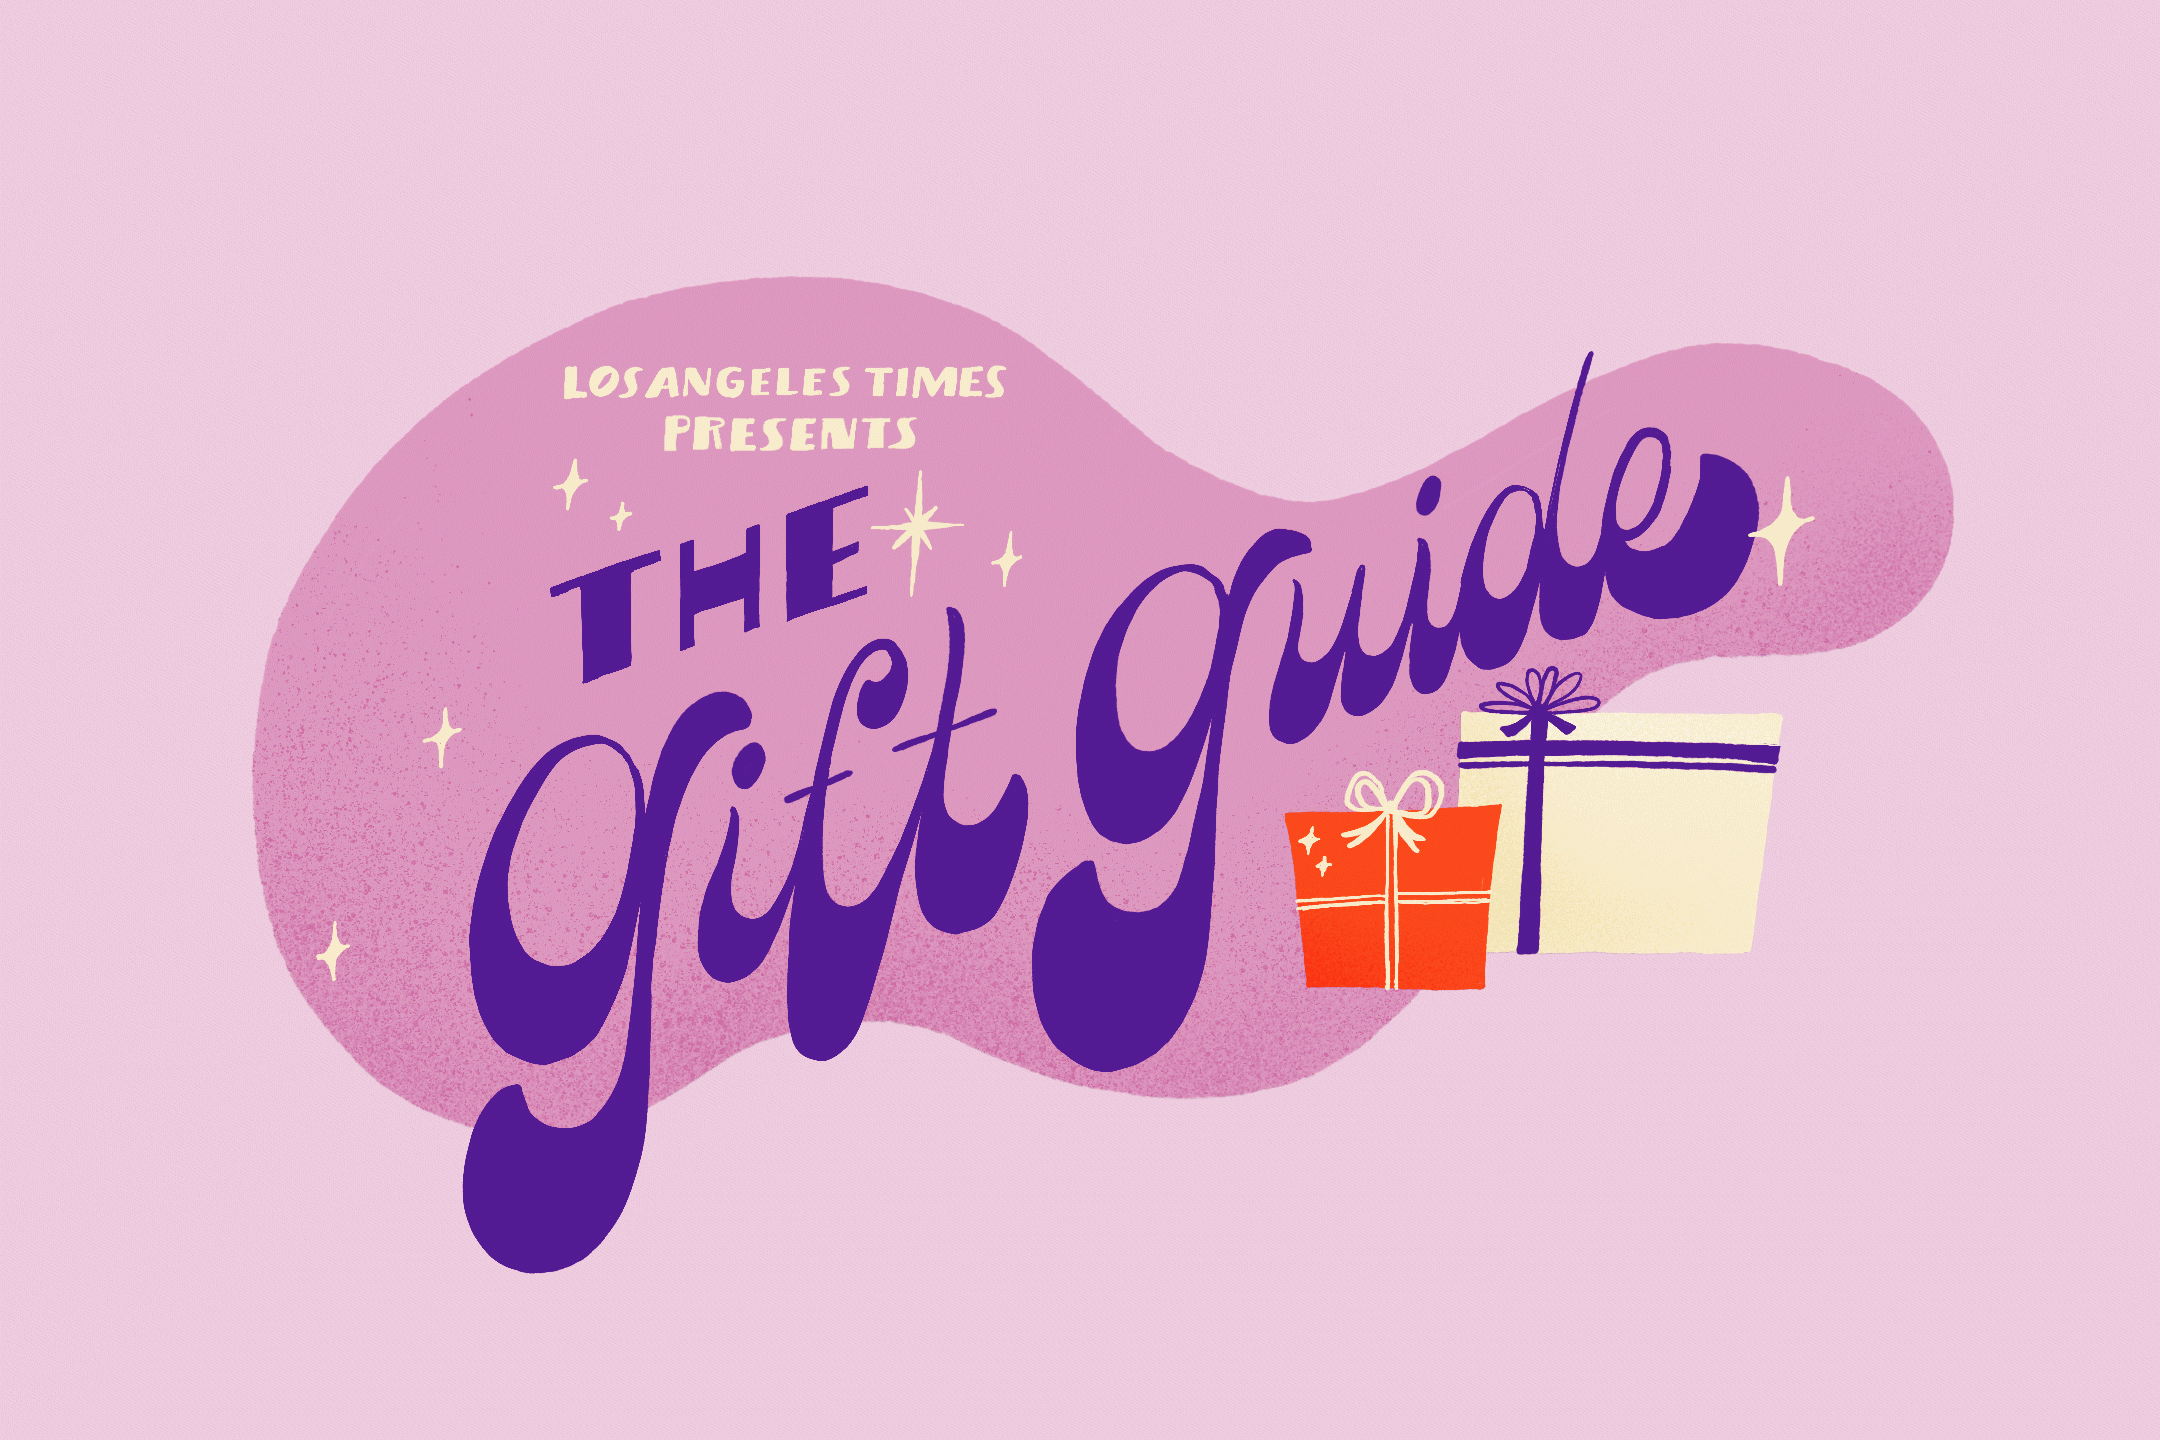 Lead art gif for 2020 gift guide lists